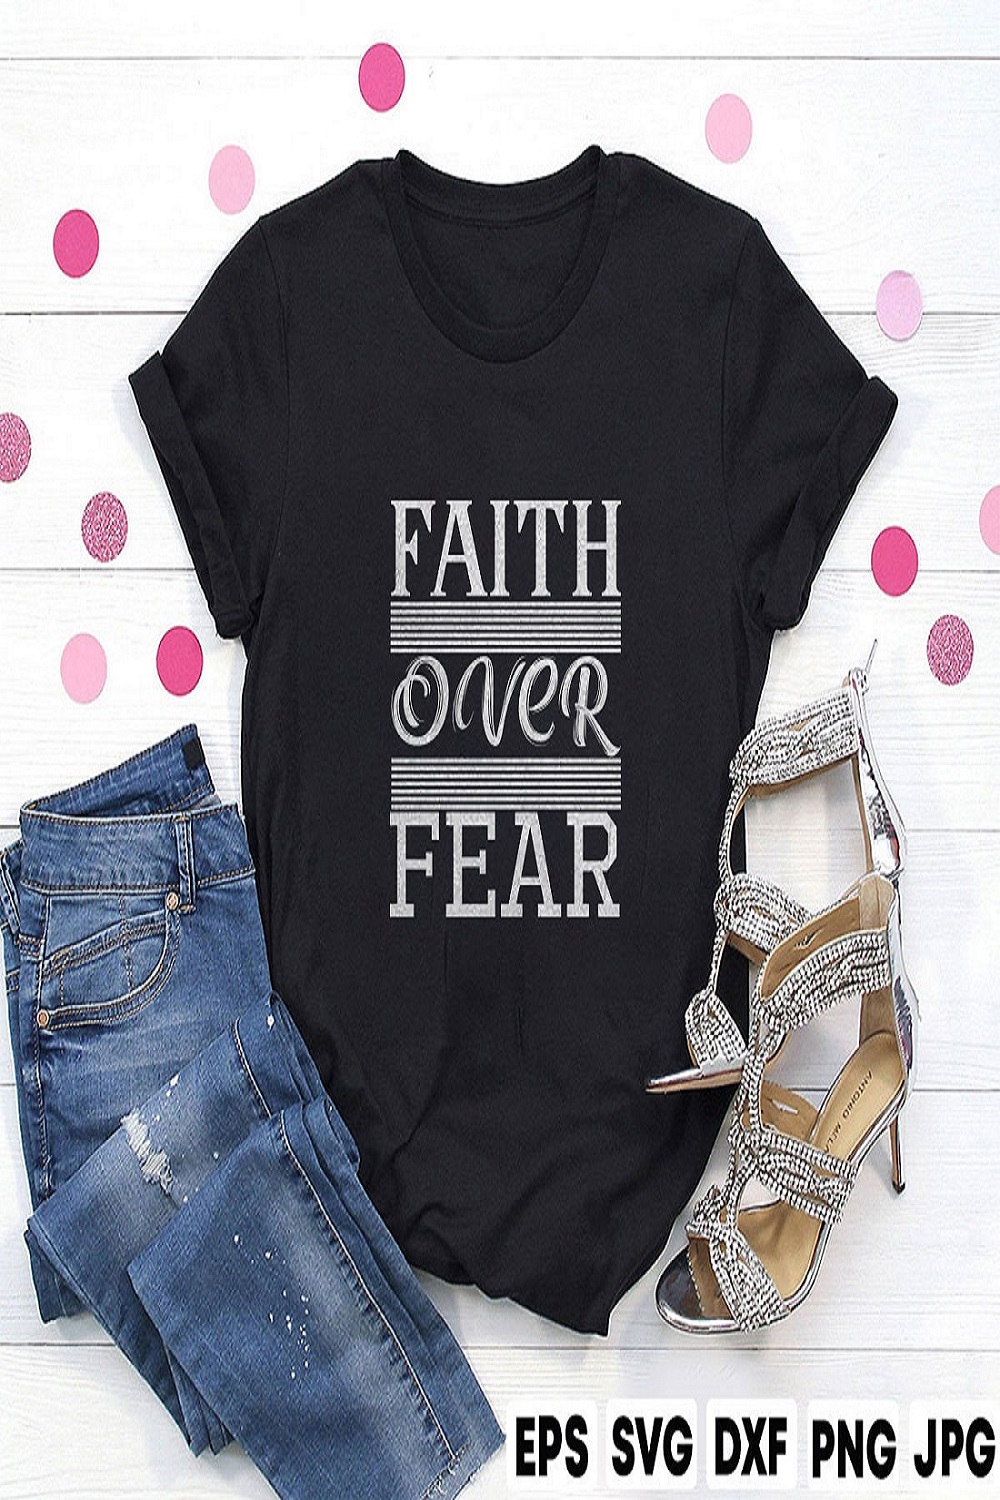 Faith Over Fear pinterest preview image.